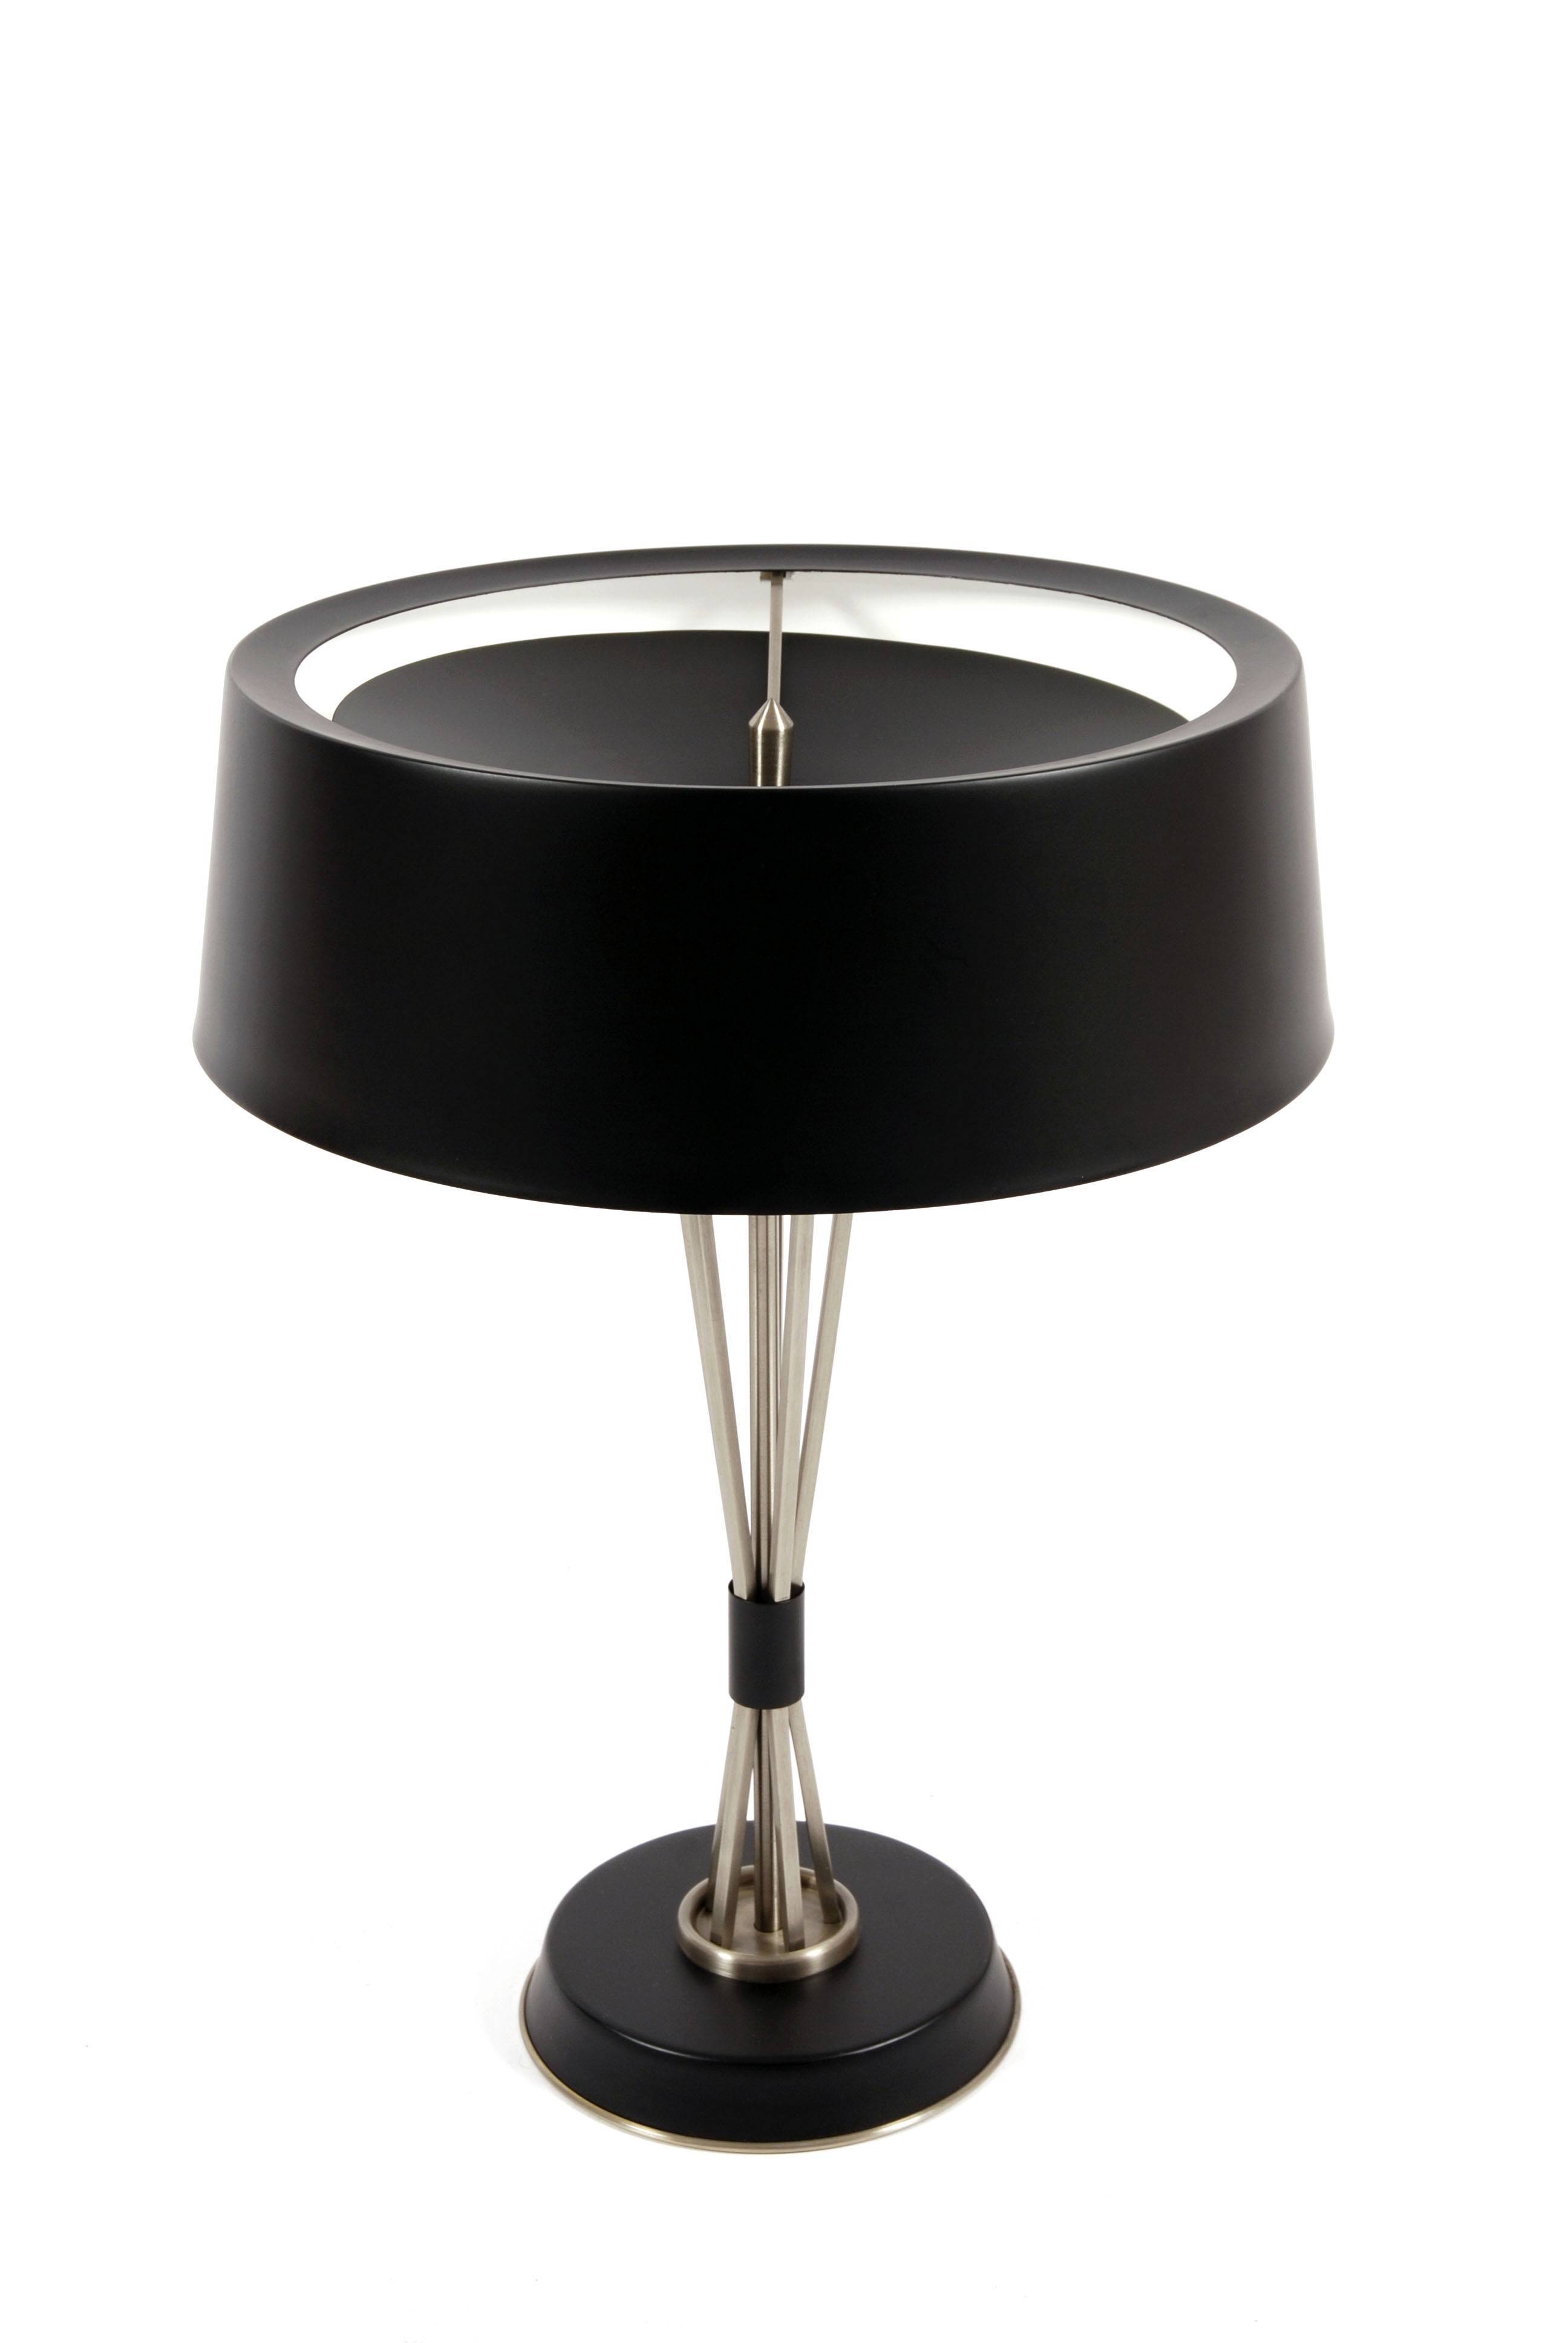 Dazzling Dining Room Table Lamps That Will Brighten Up Your House!